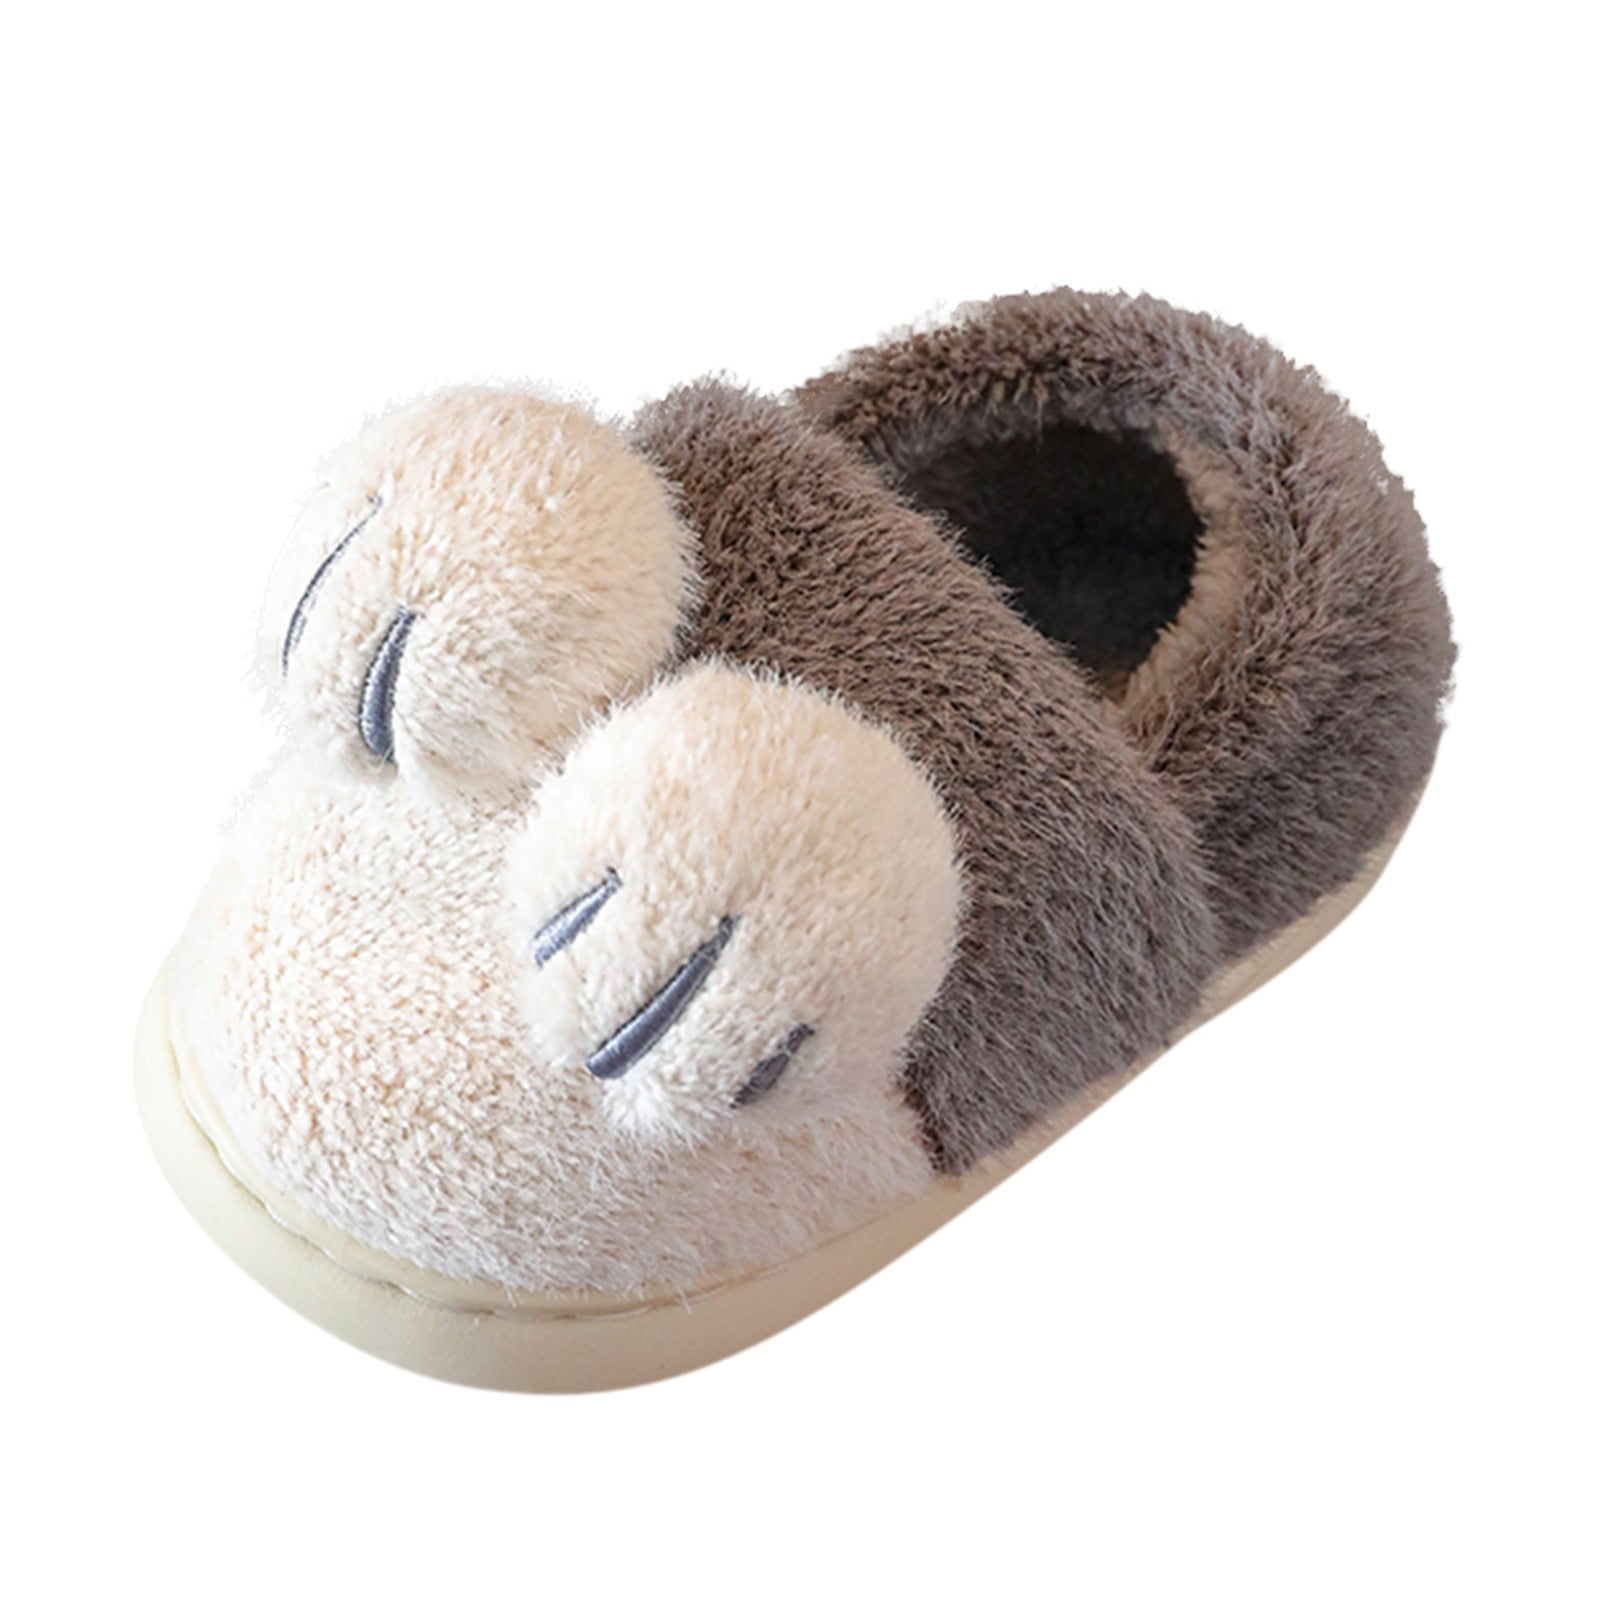 nsendm Female Shoes Toddler Girls Slippers Size 11 Cotton Slippers ...